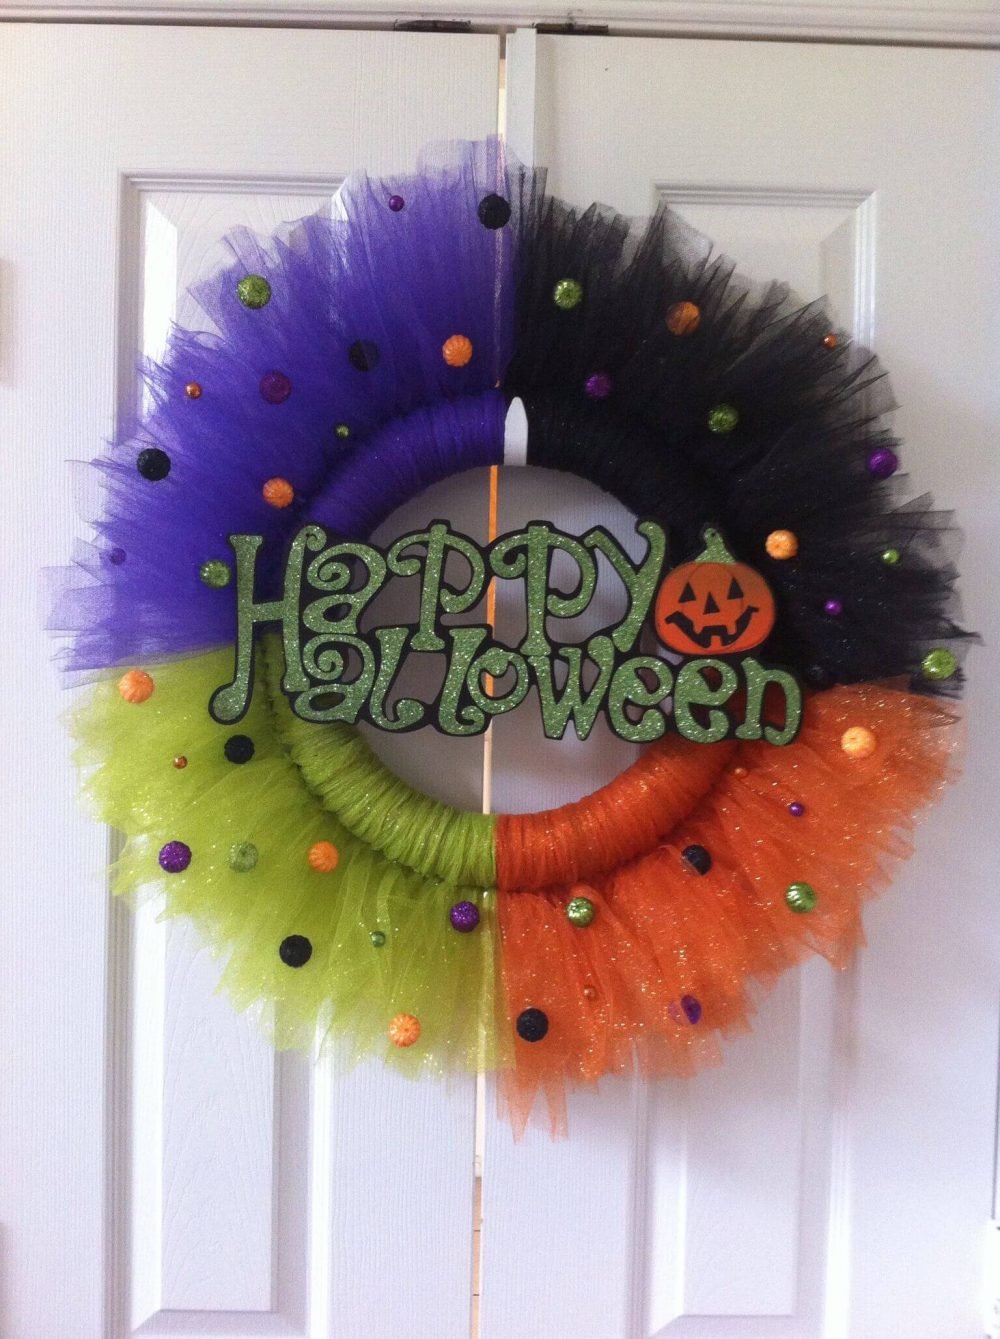 A wreath with a happy halloween sign on it
